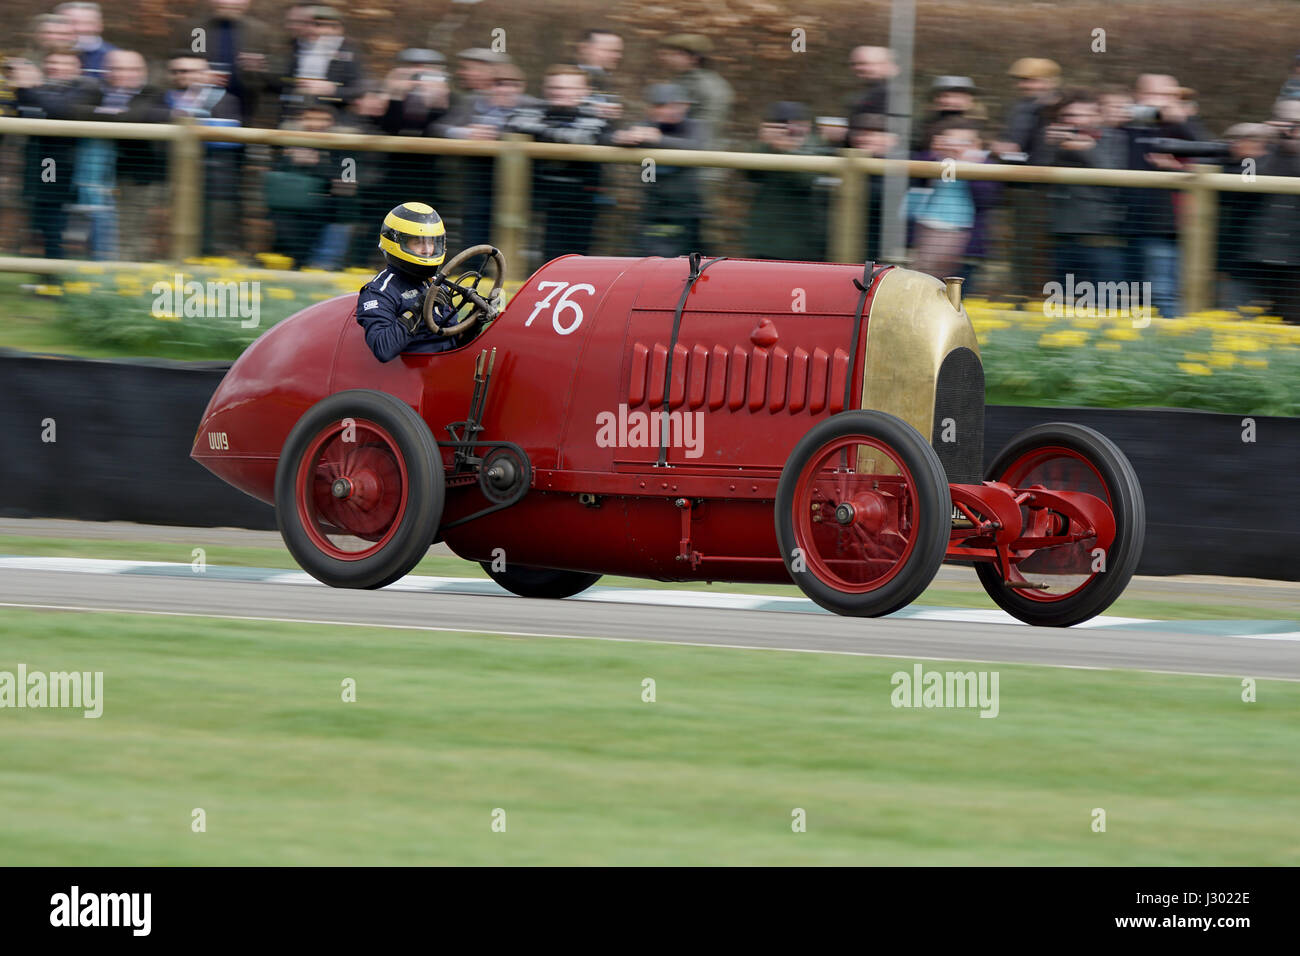 Duncan Pittaway driving the FIAT S76 'Beast of Turin' at the 75th Goodwood Members Meeting Stock Photo